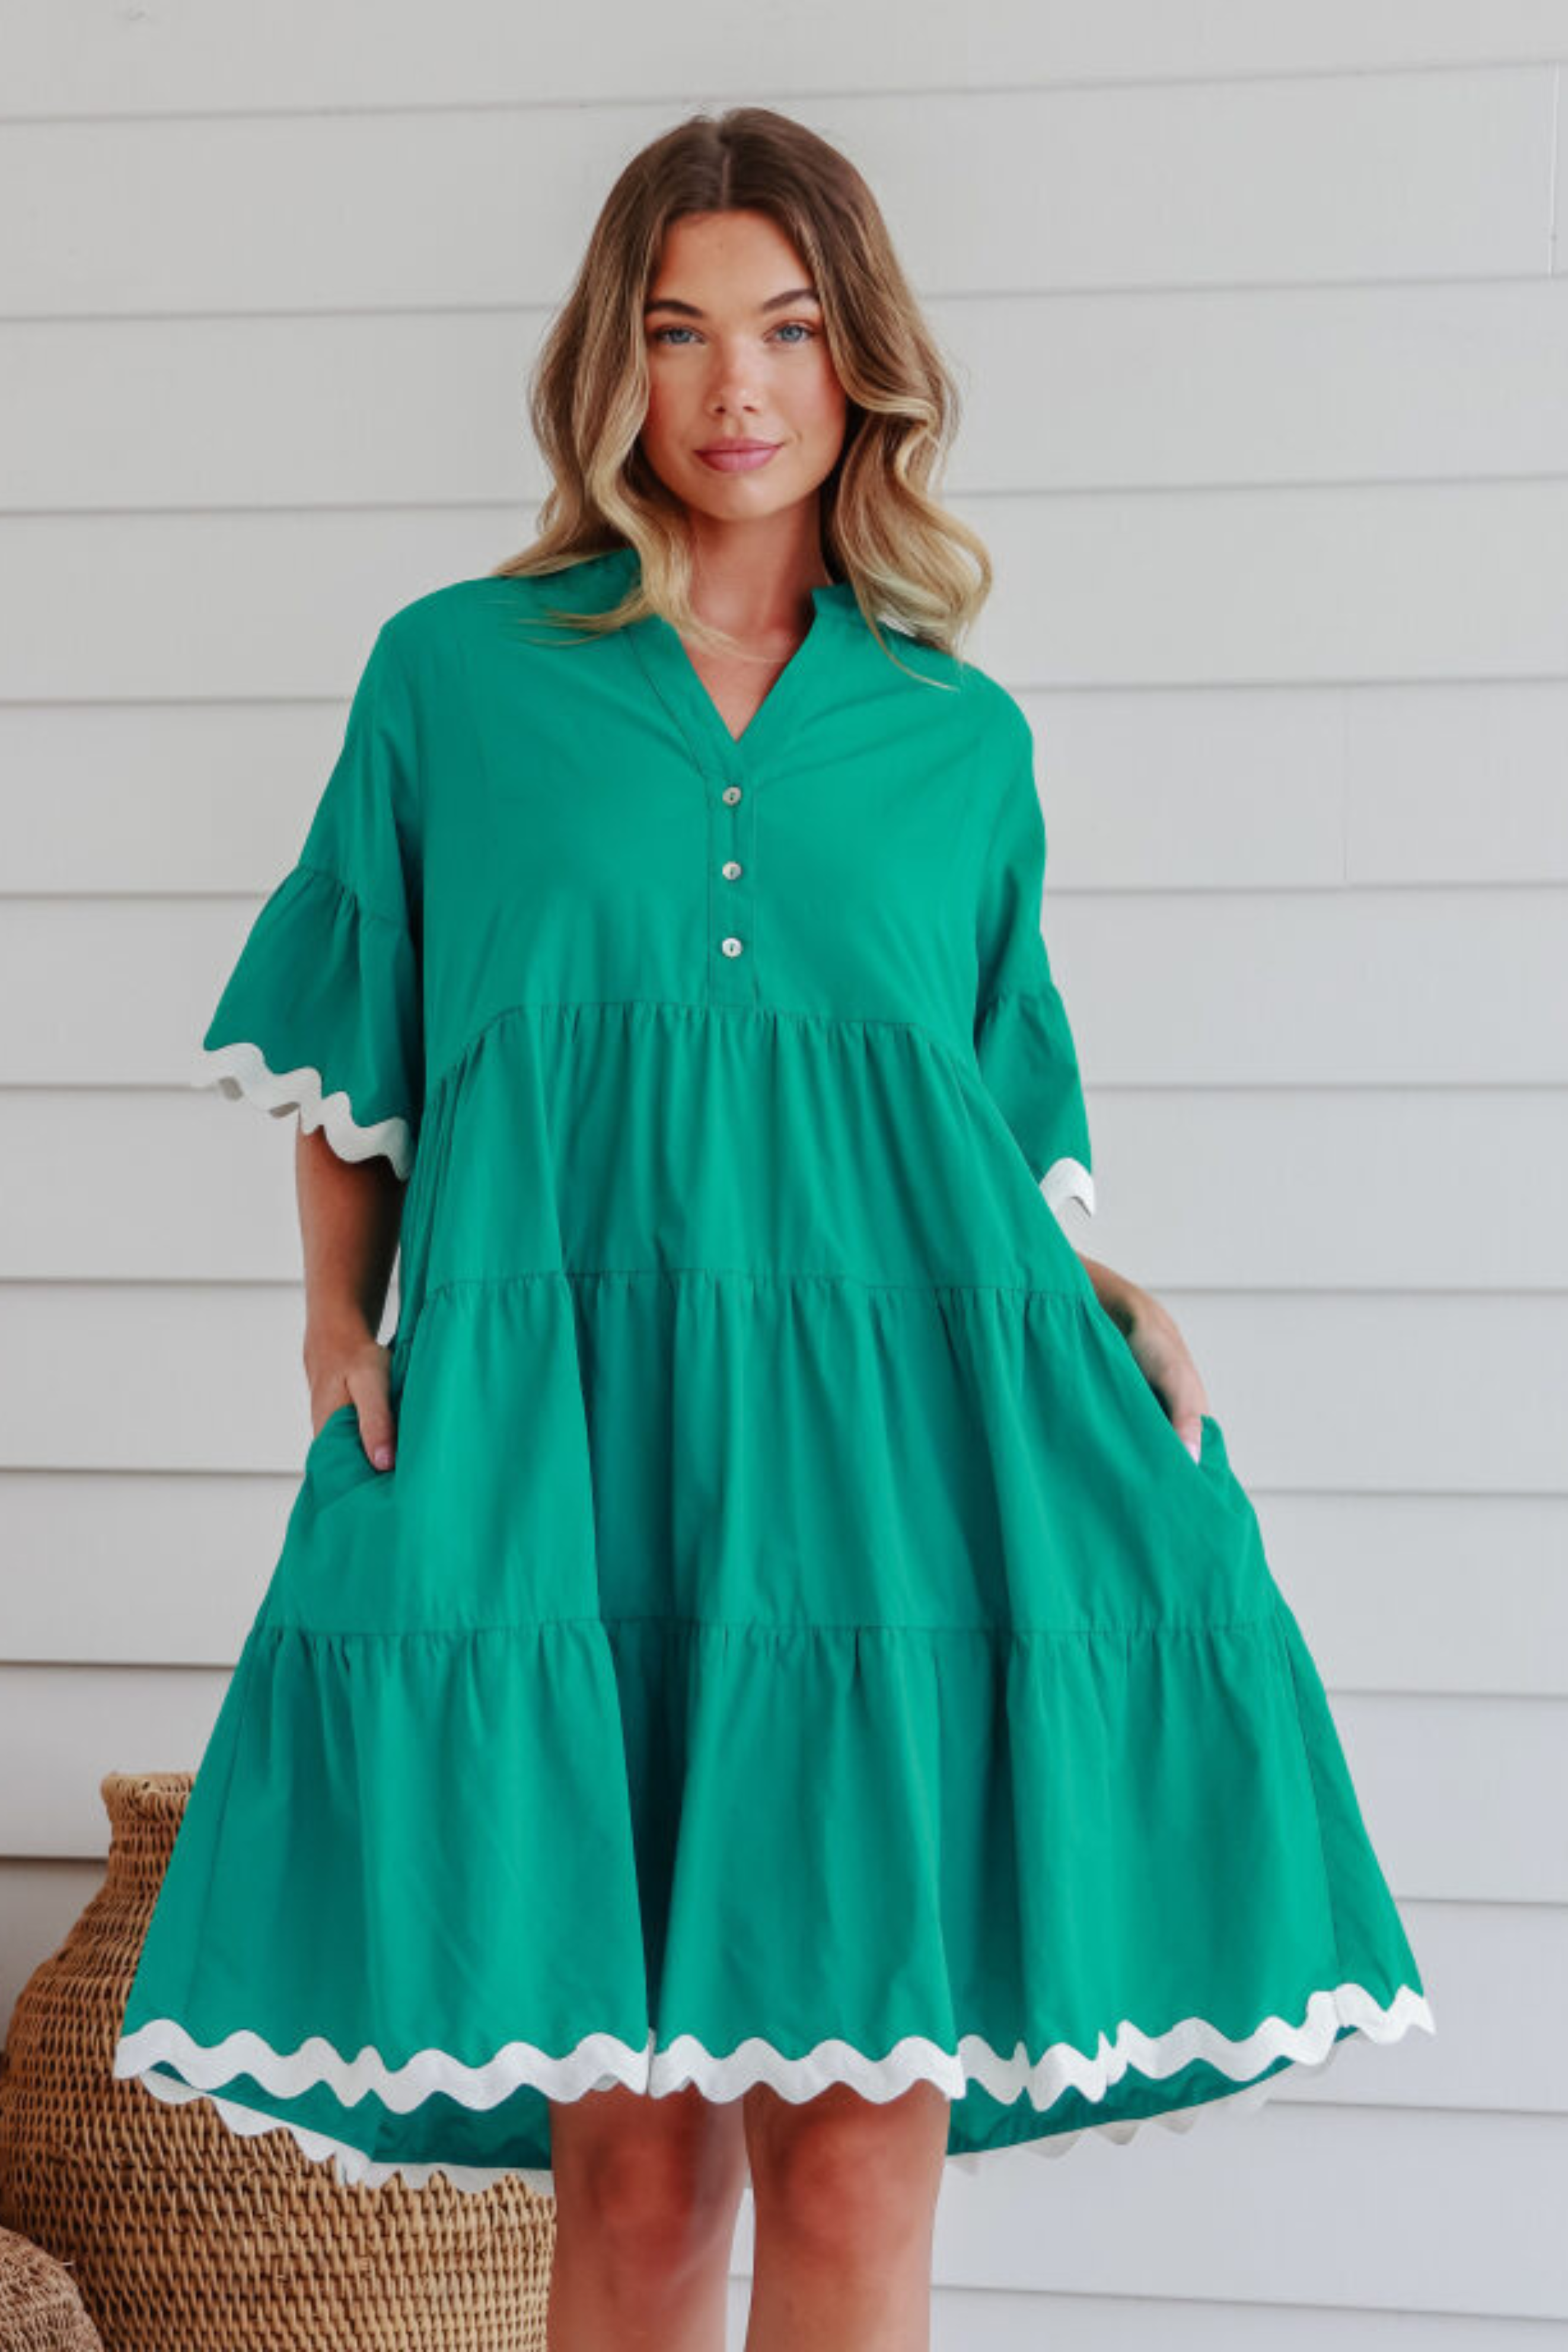 ABIGAIL Dress in Emerald Green and White